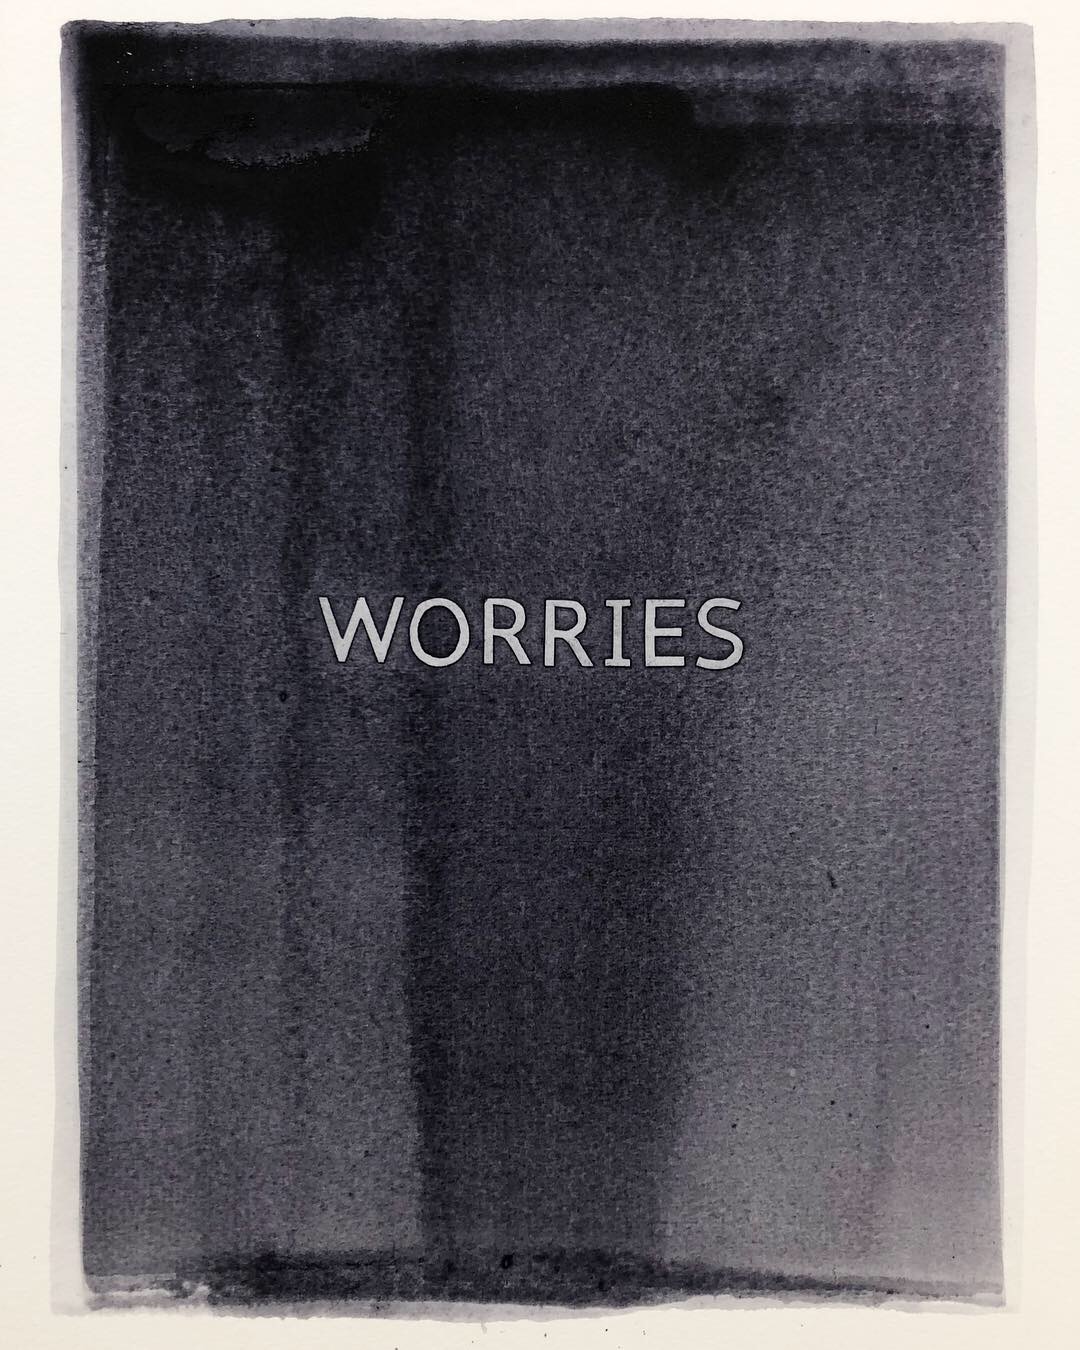   The Very Least Of Our Worries . 2019. Watercolour and polymer varnish on paper. Panel 6. 36.5x27cm 